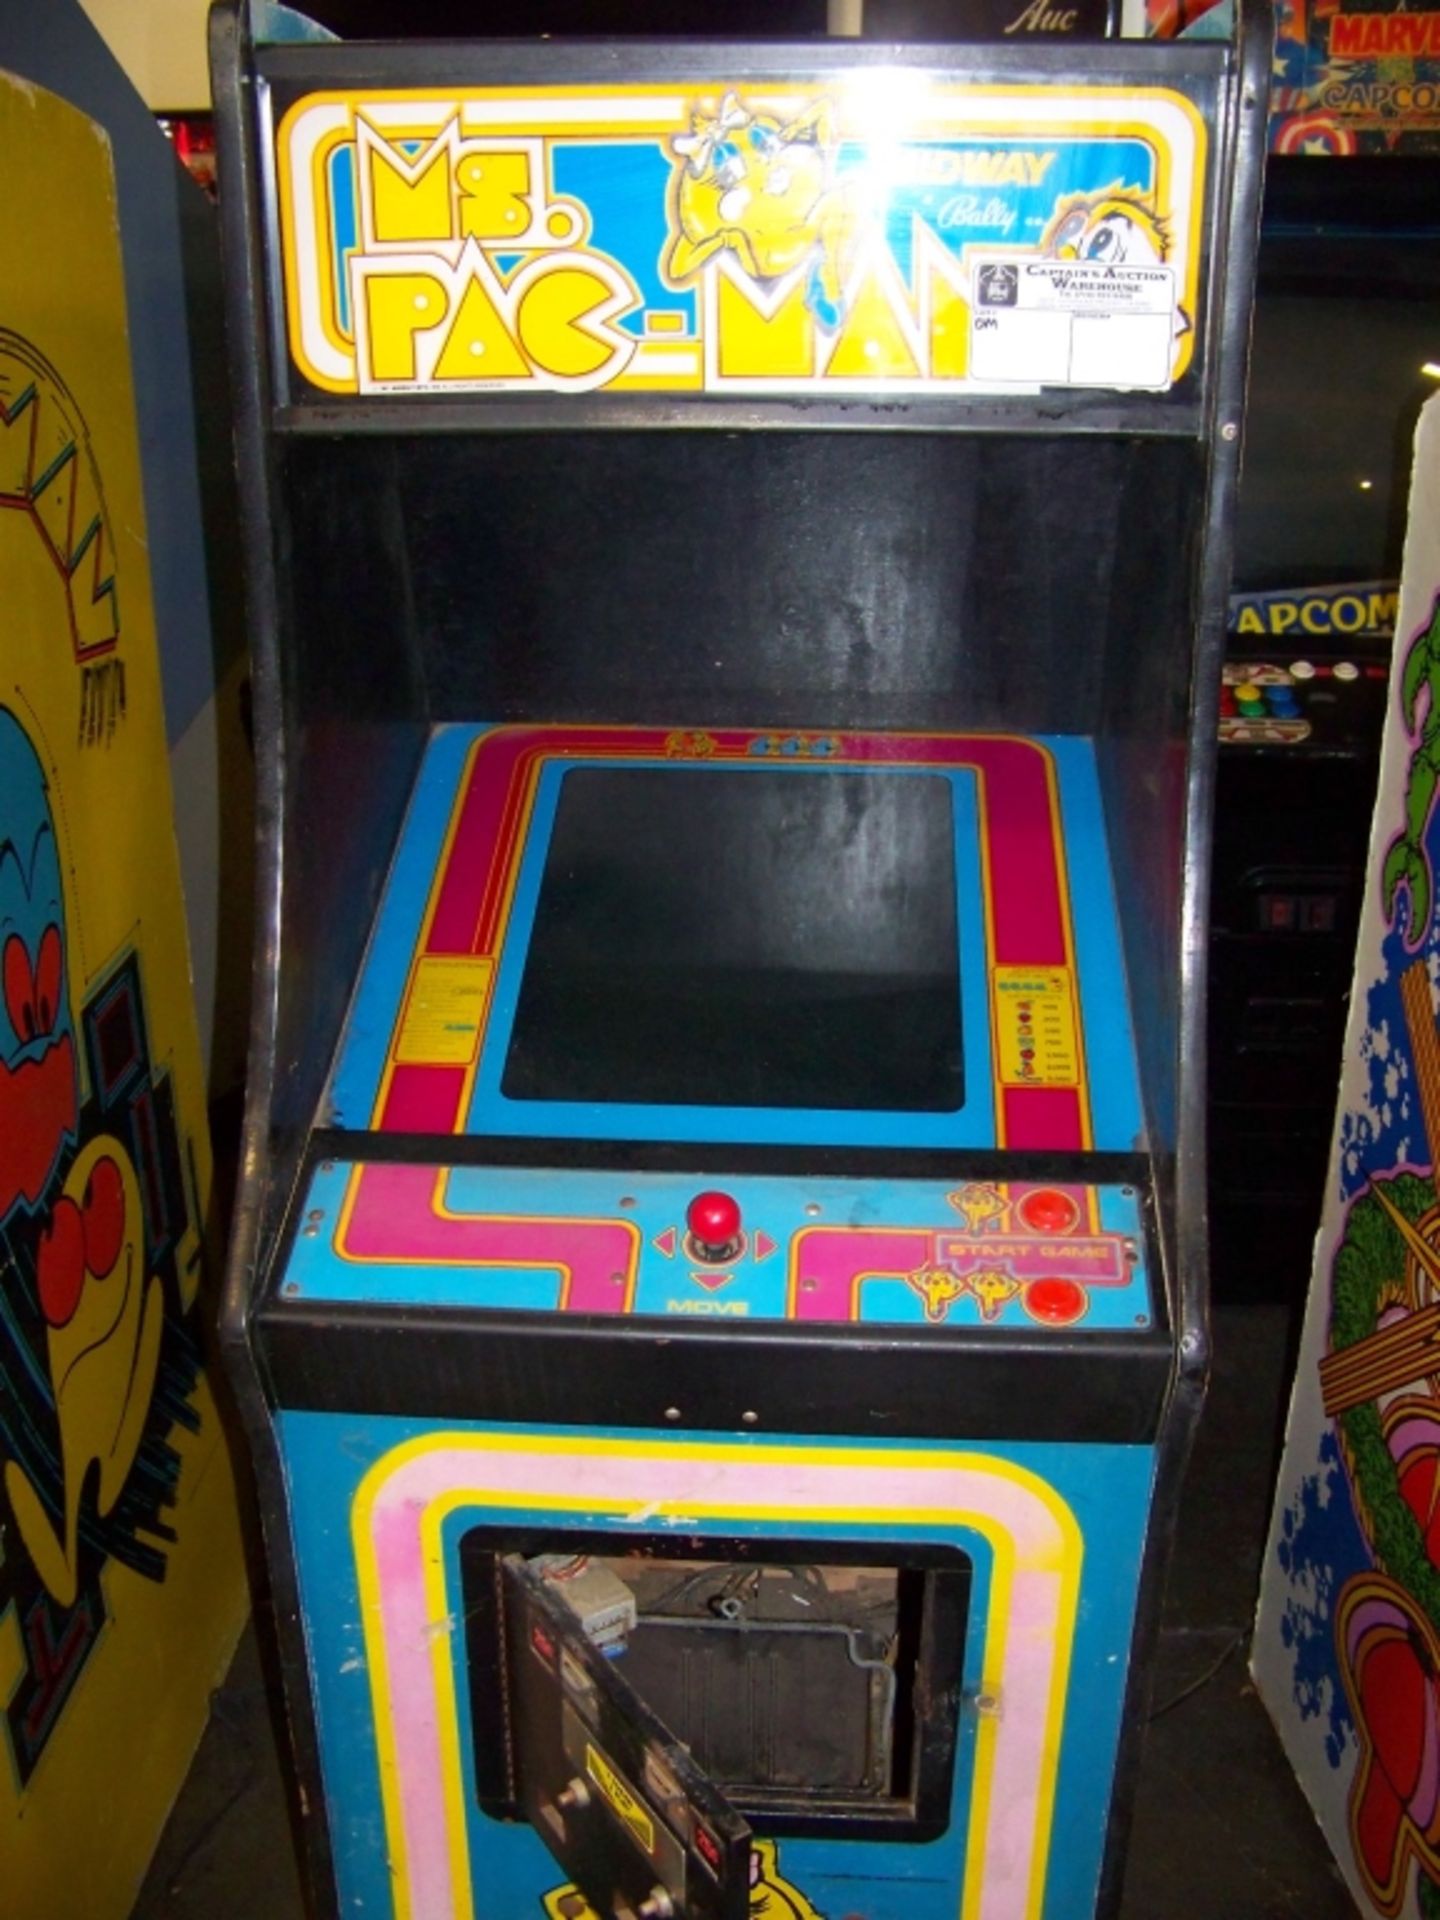 MS PACMAN CLASSIC ARCADE GAME MIDWAY Item is in used condition. Evidence of wear and commercial - Image 2 of 4